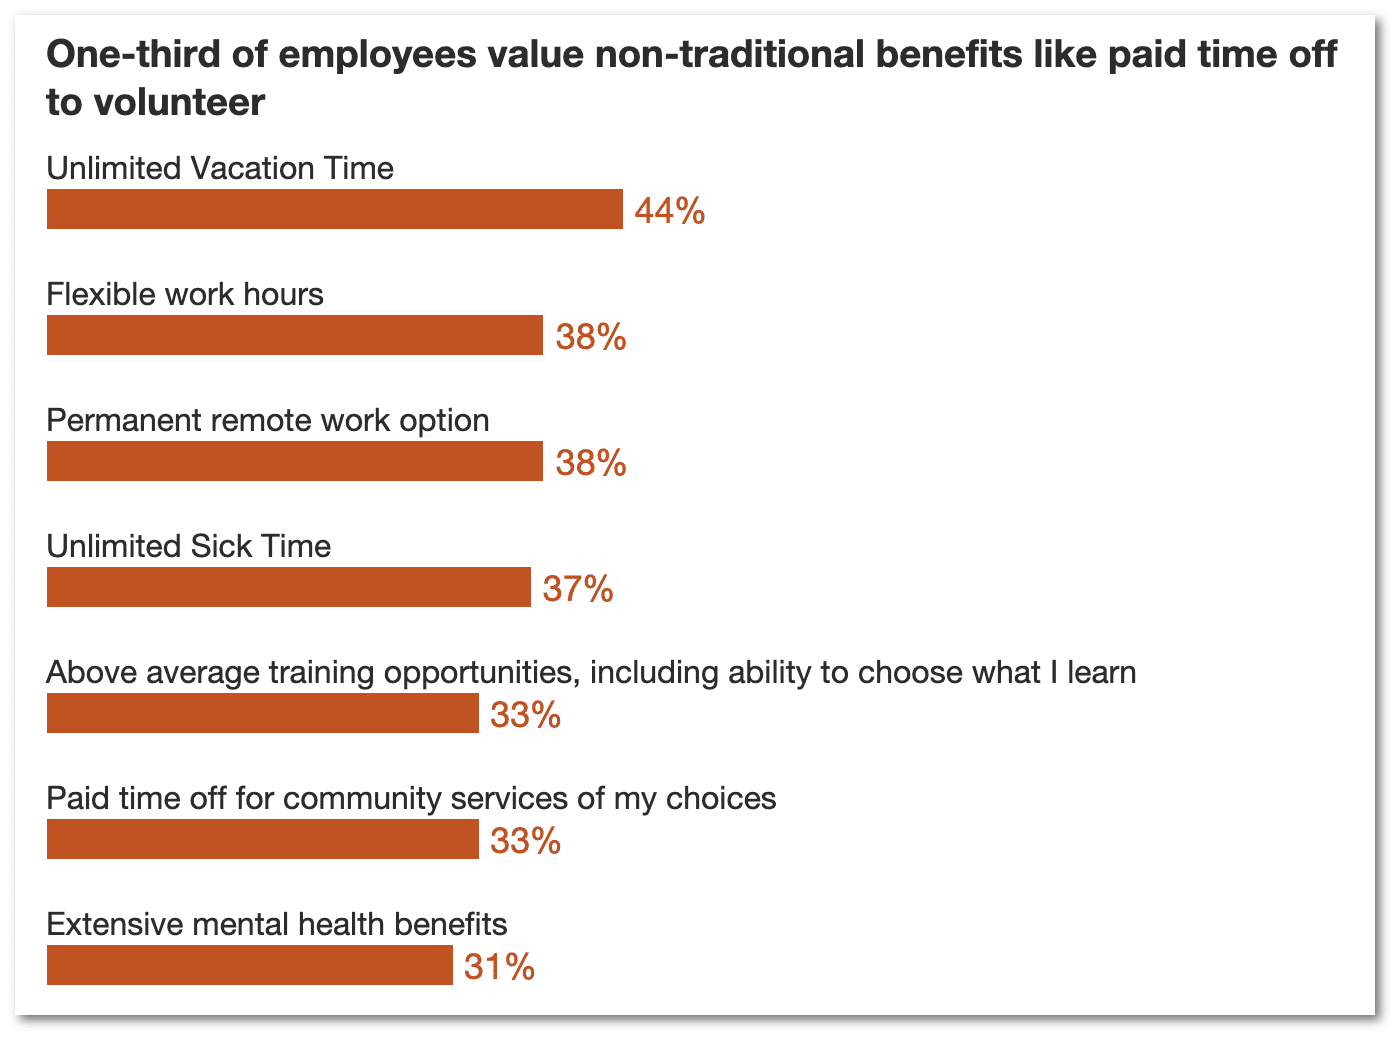 One-third of employees value non-traditional benefits like paid time off to volunteer